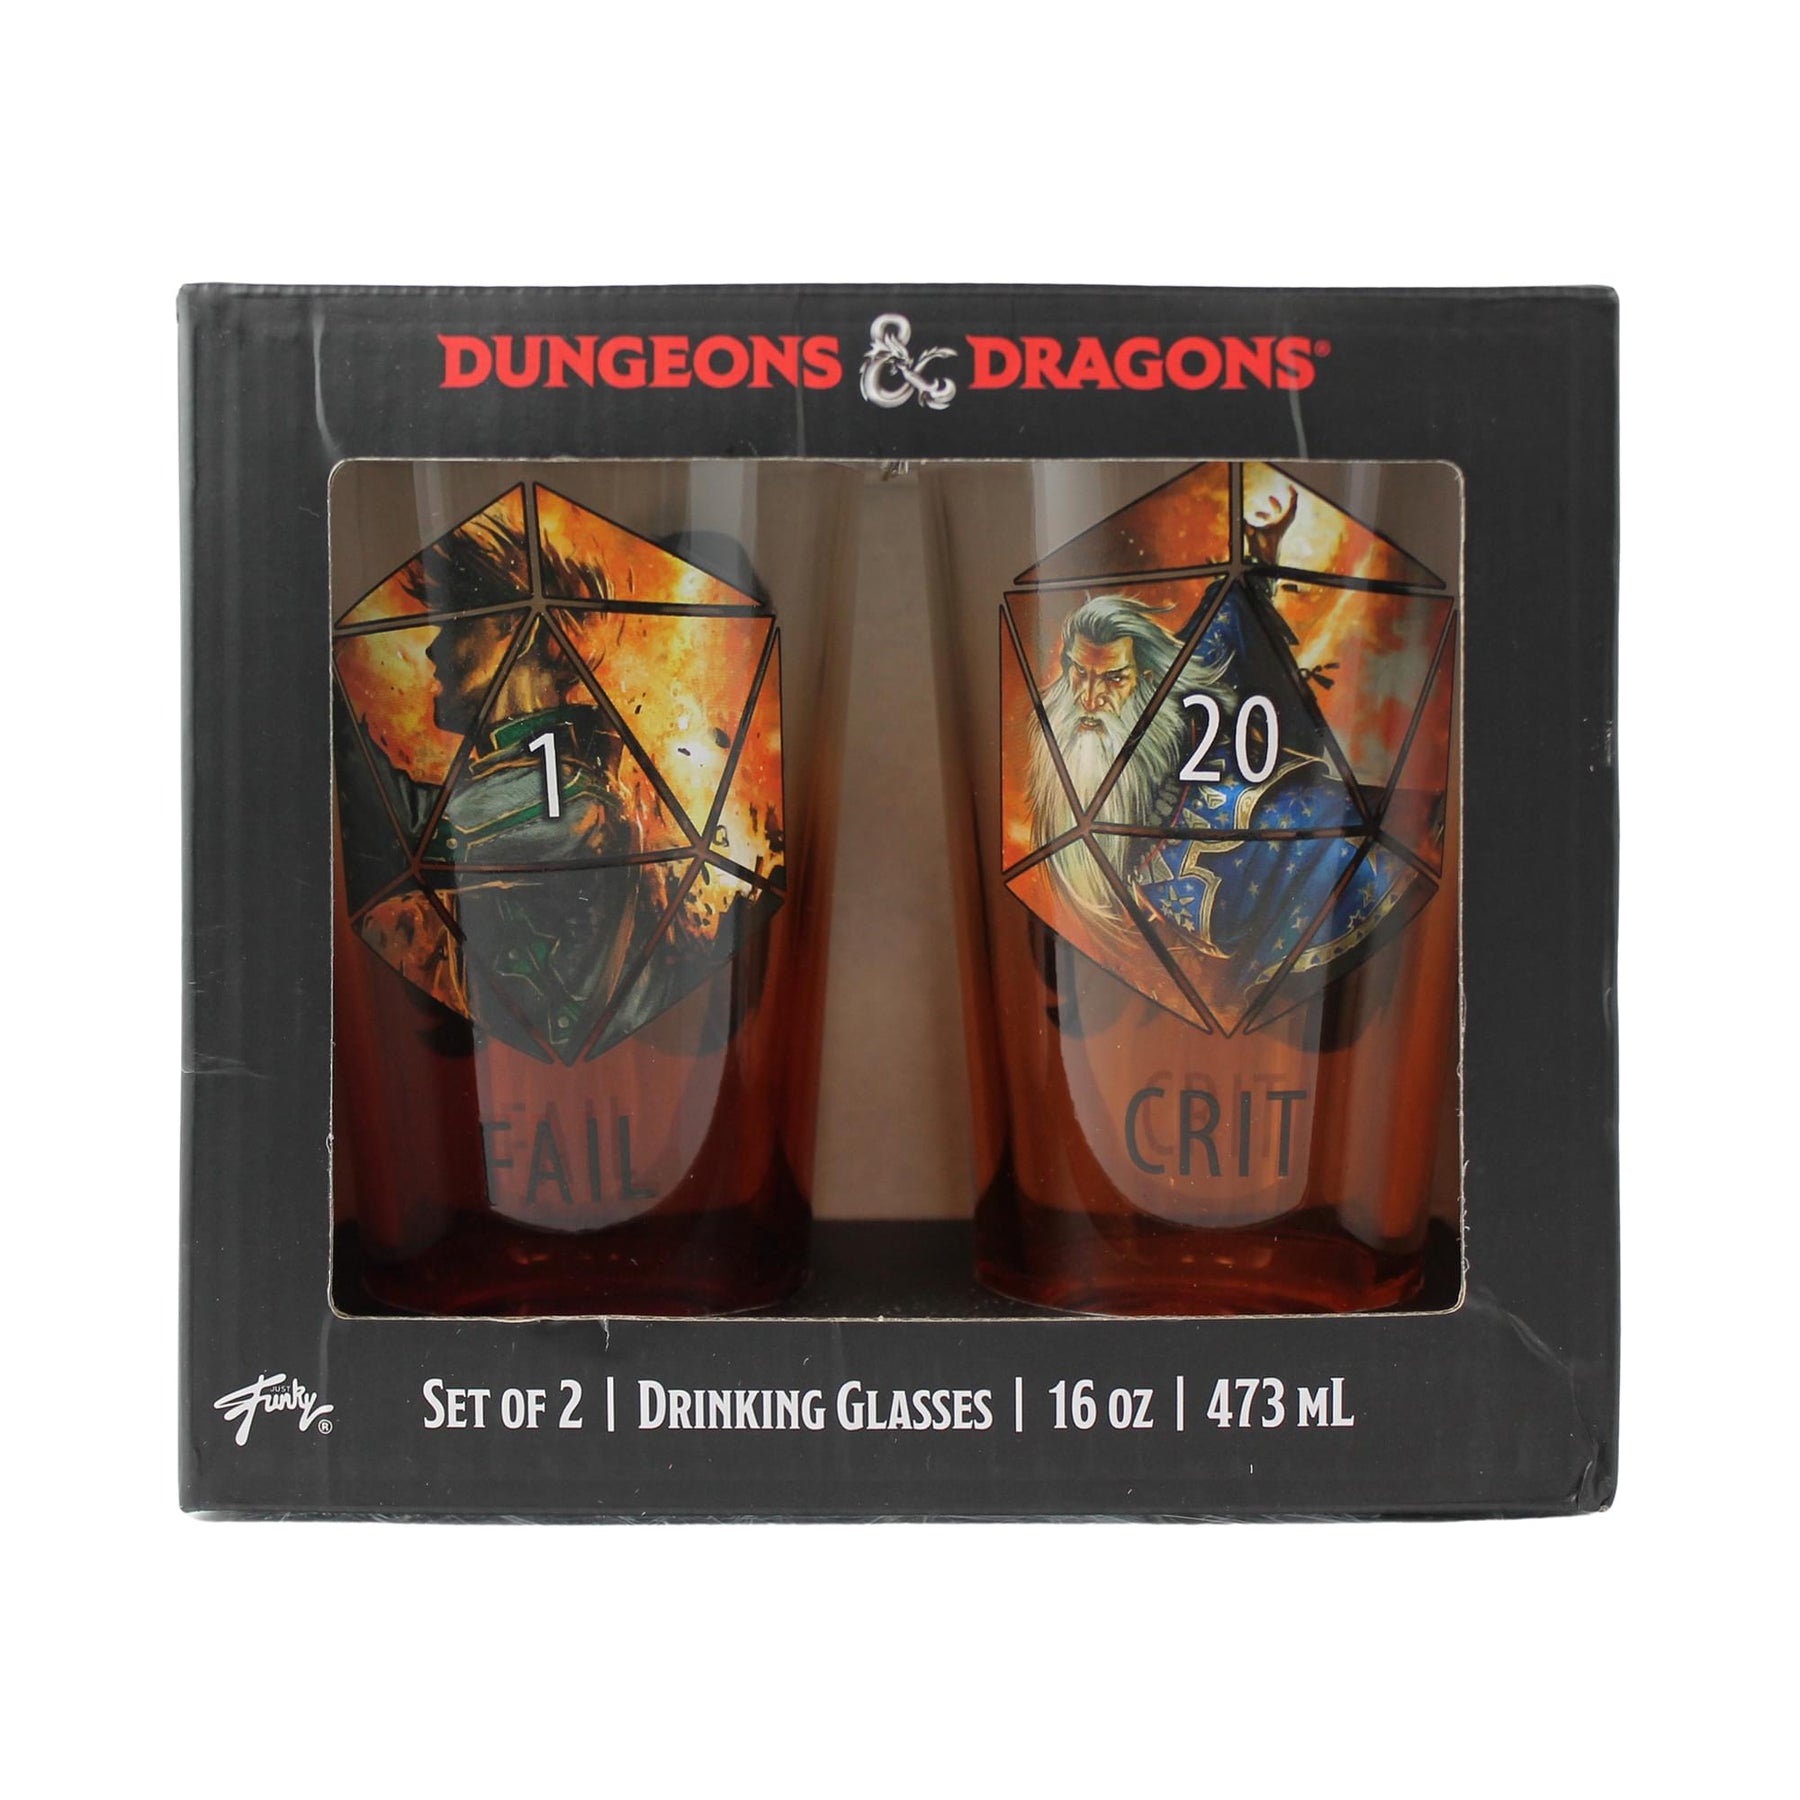 Dungeons & Dragons "Fail" and "Crit" 16oz Pint Glass Set of 2